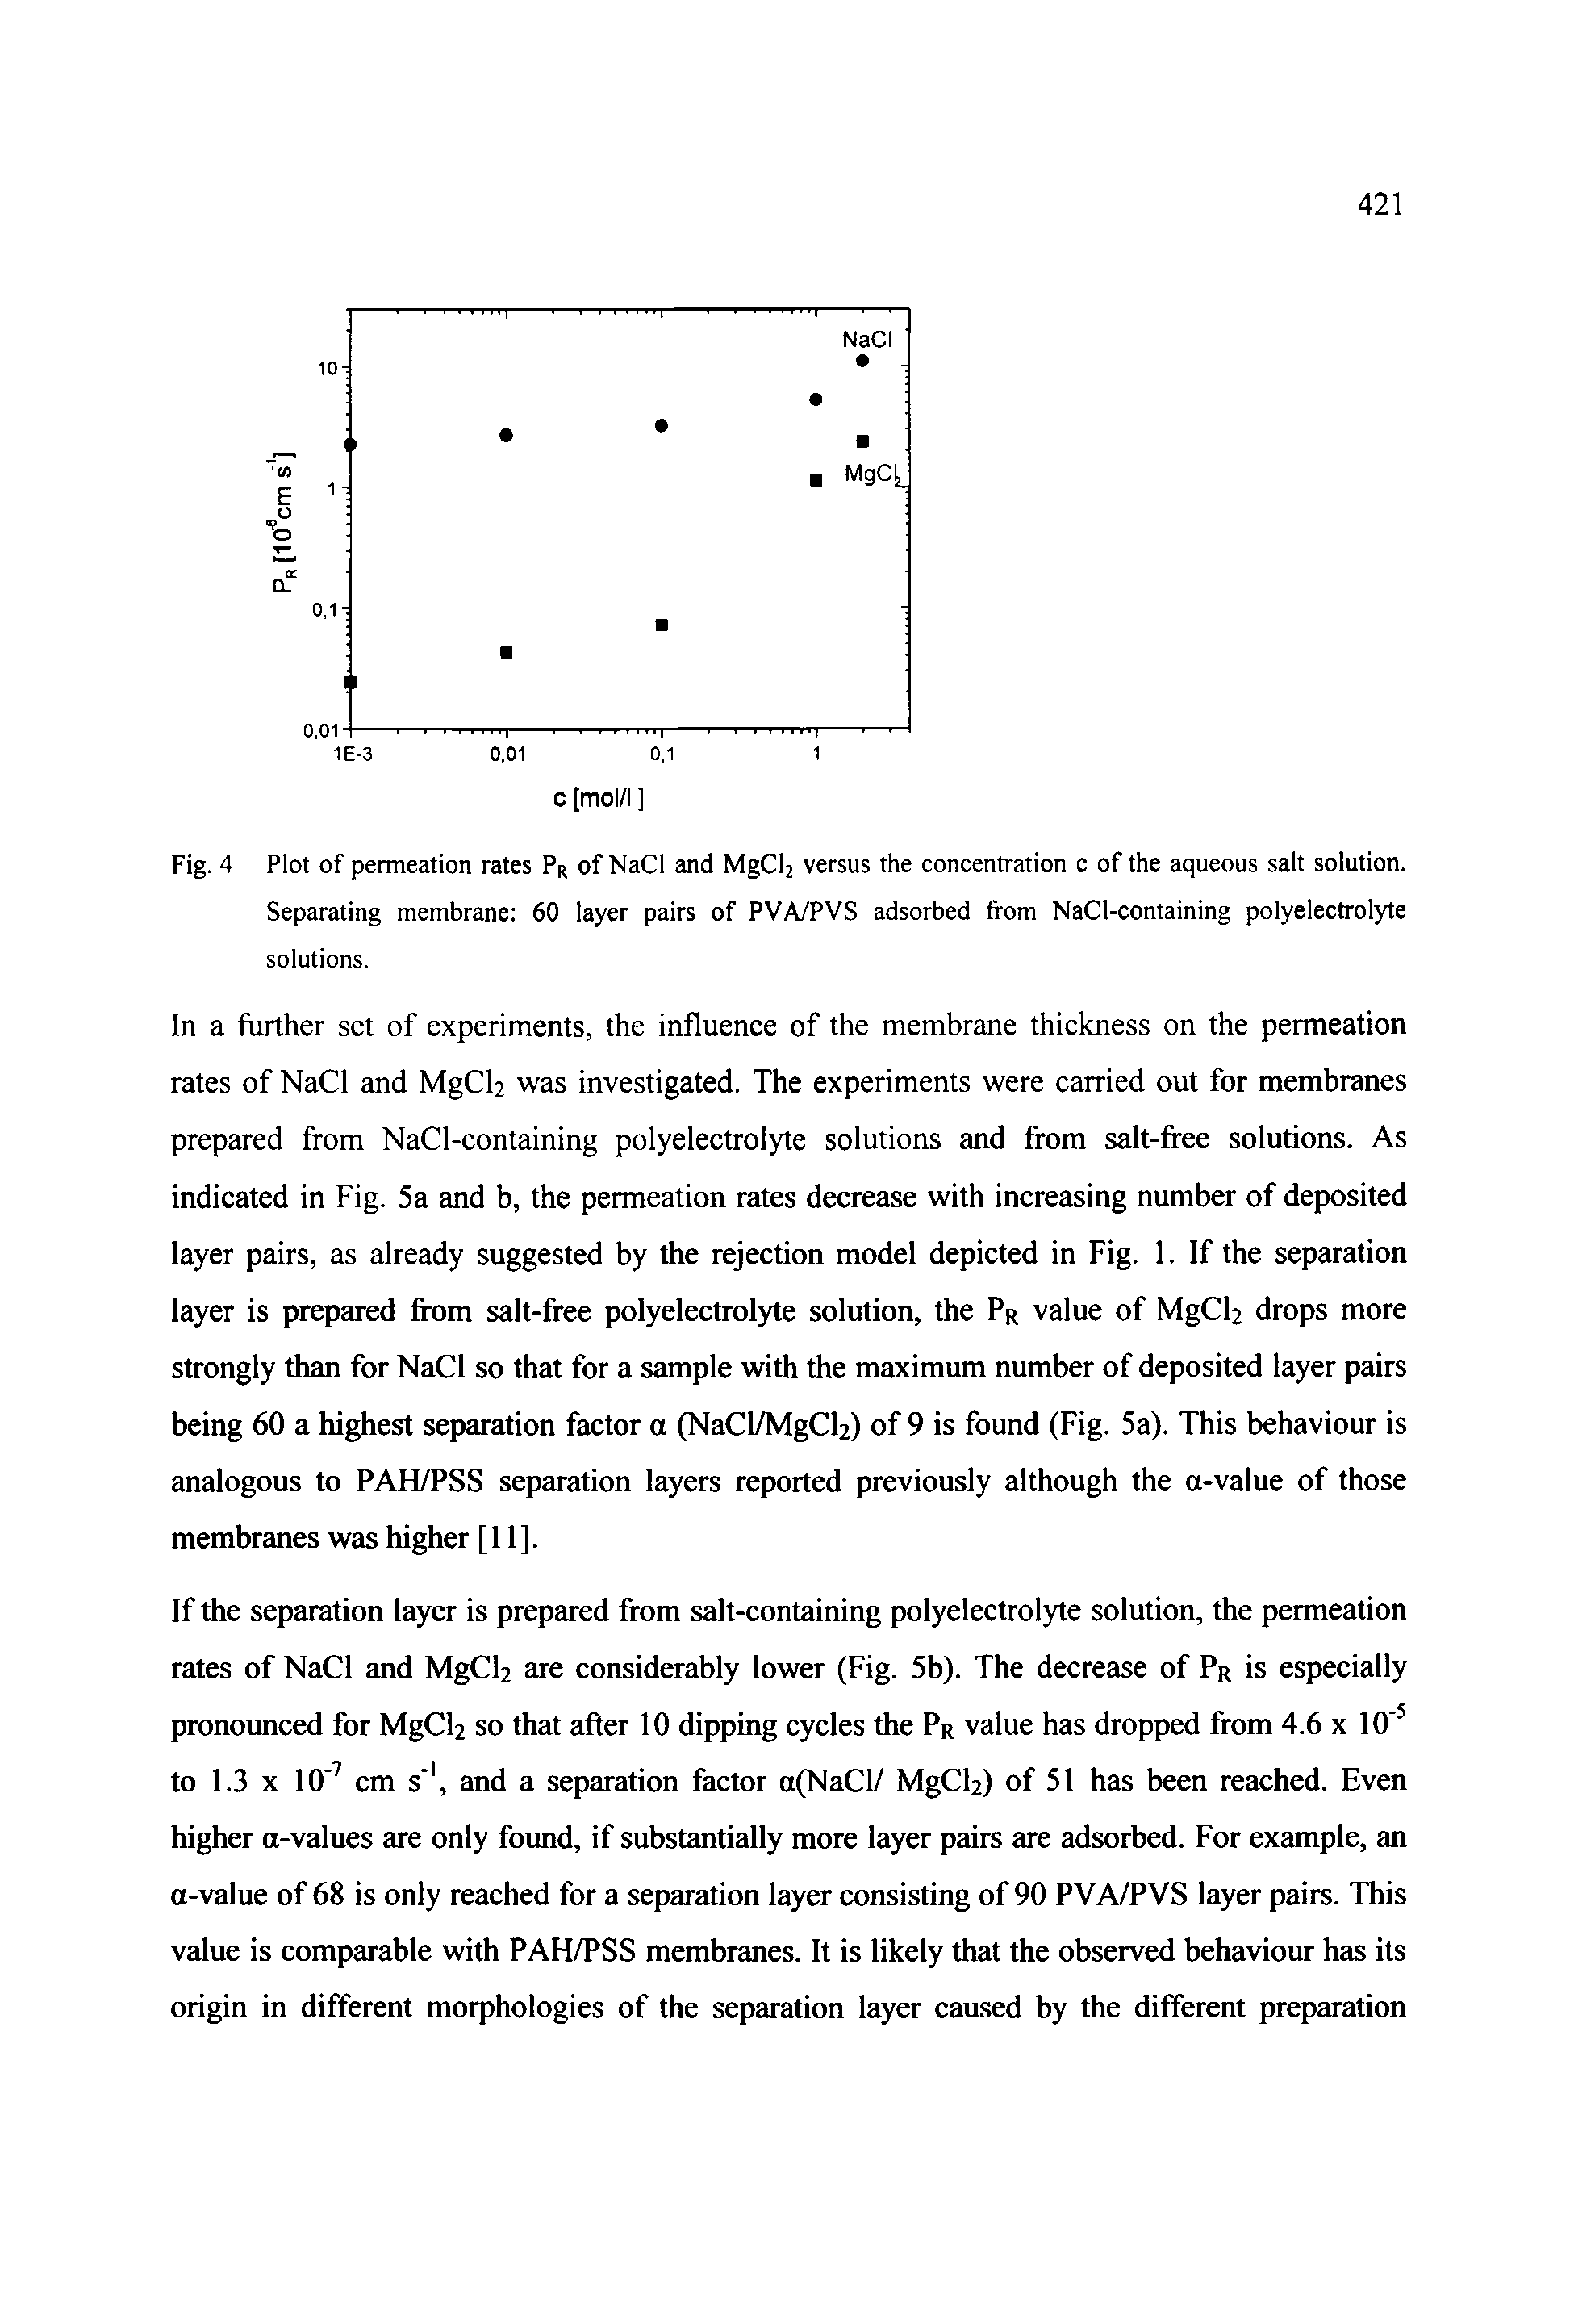 Fig. 4 Plot of permeation rates Pr of NaCl and MgClj versus the concentration c of the aqueous salt solution. Separating membrane 60 layer pairs of PVA/PVS adsorbed from NaCl-containing polyelectrolyte solutions.